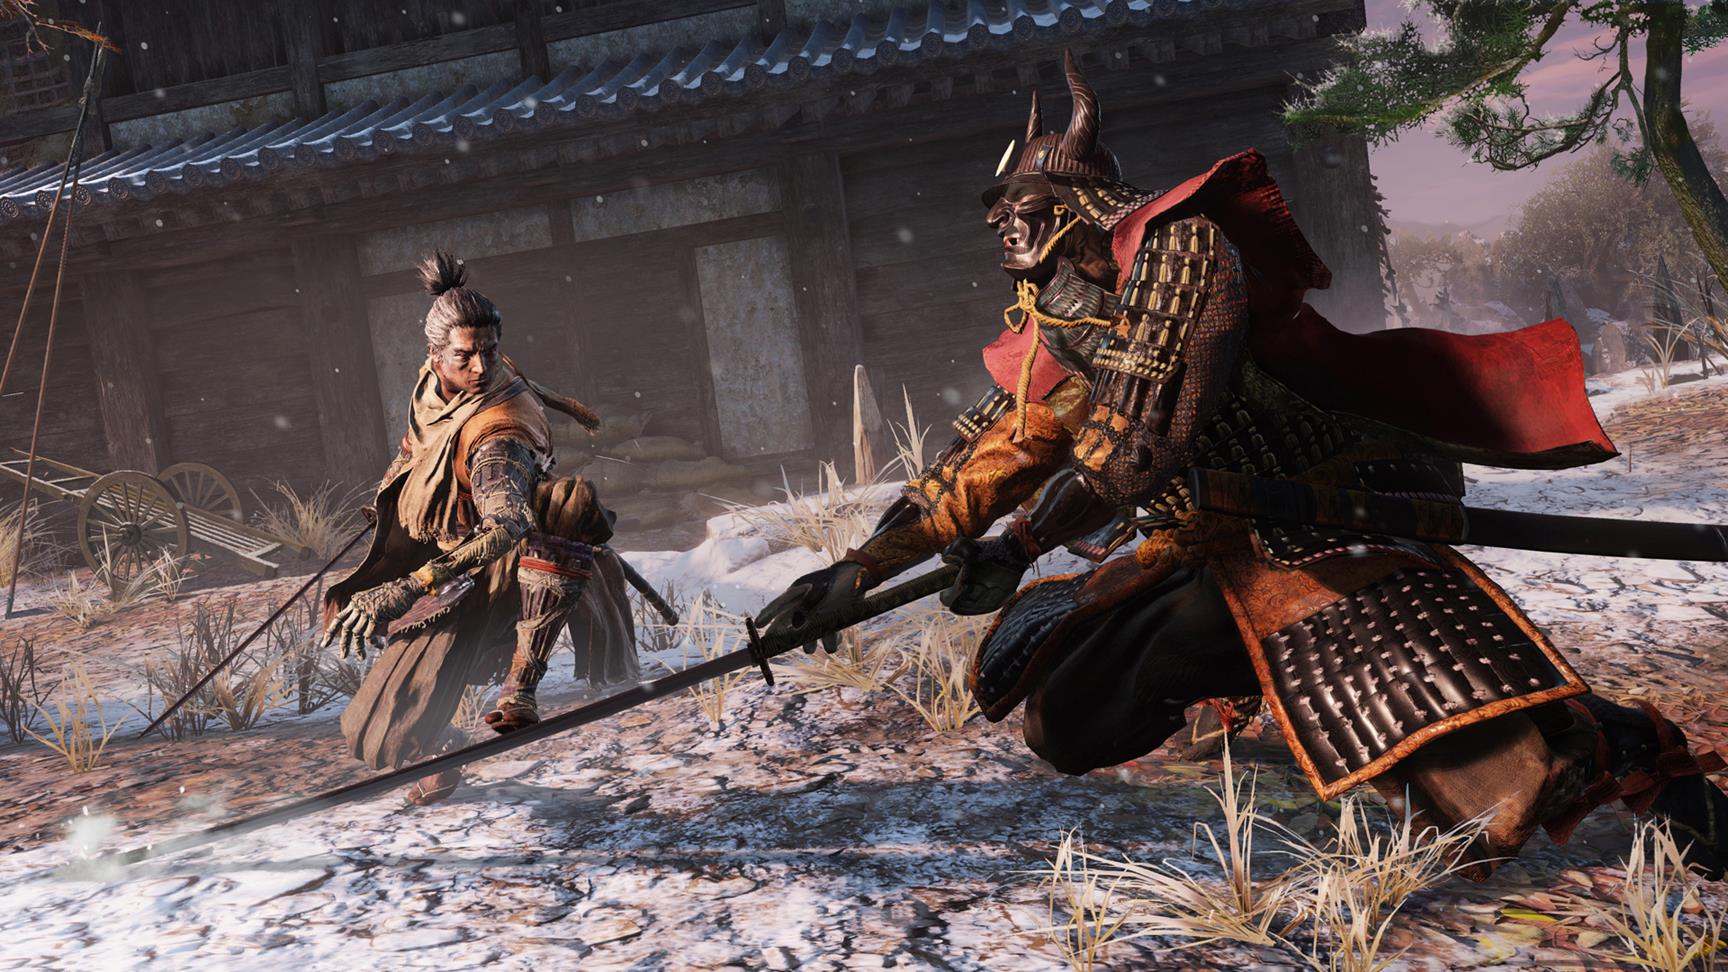 Image for This is our first look at gameplay footage of Sekiro: Shadows Die Twice